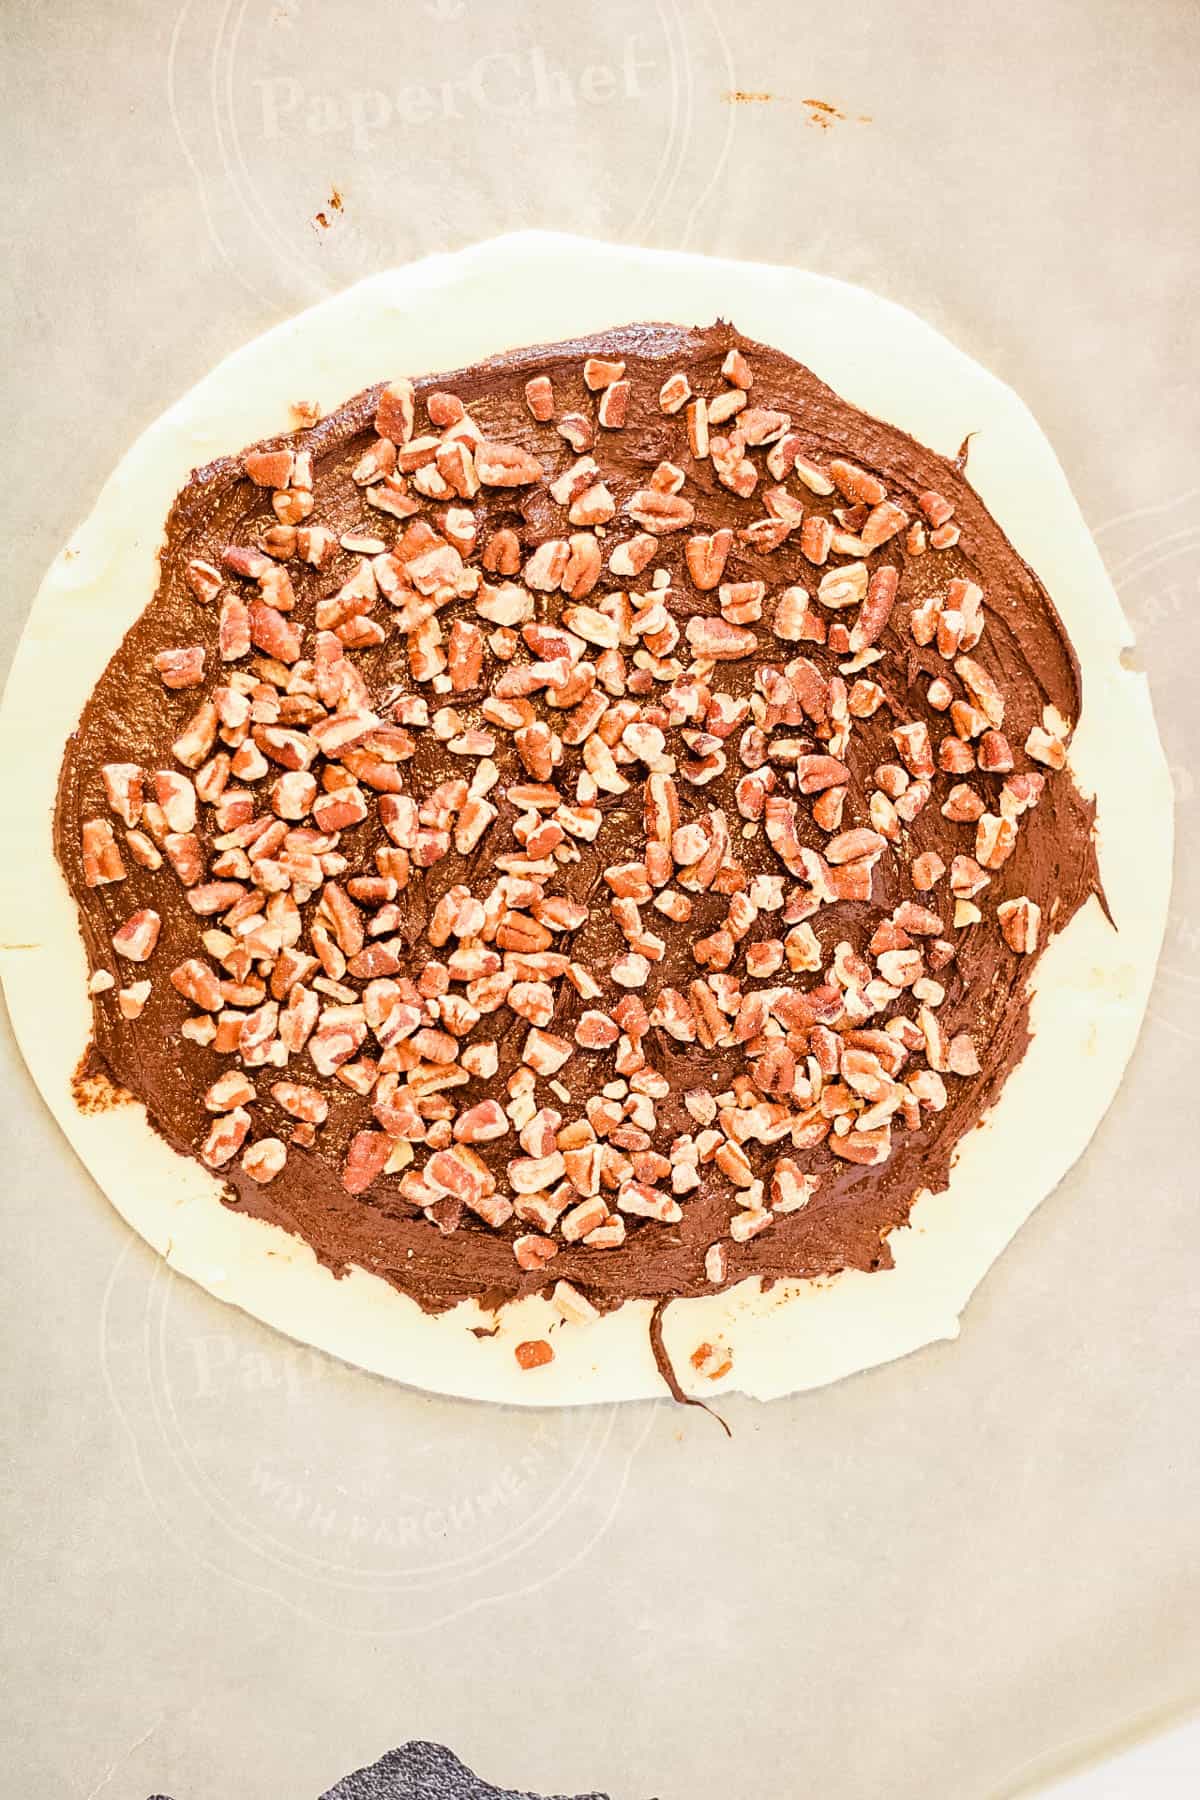 Pecans added on top of the chocolate.